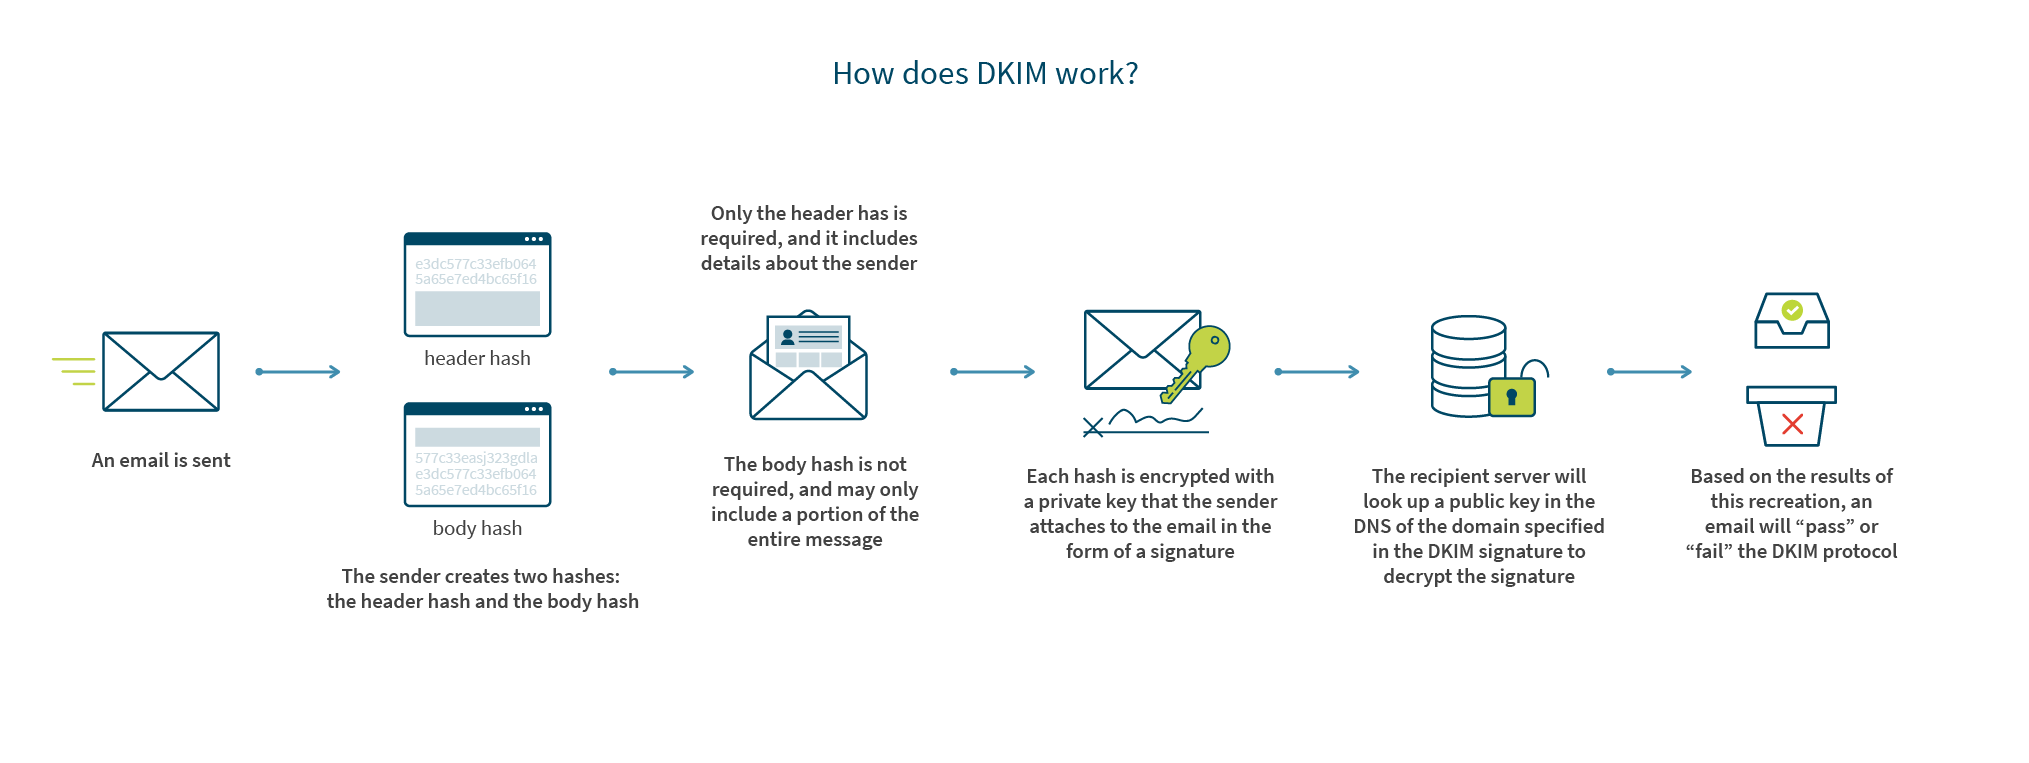 How does DKIM work? An email his sent and the sender creates two hashes.